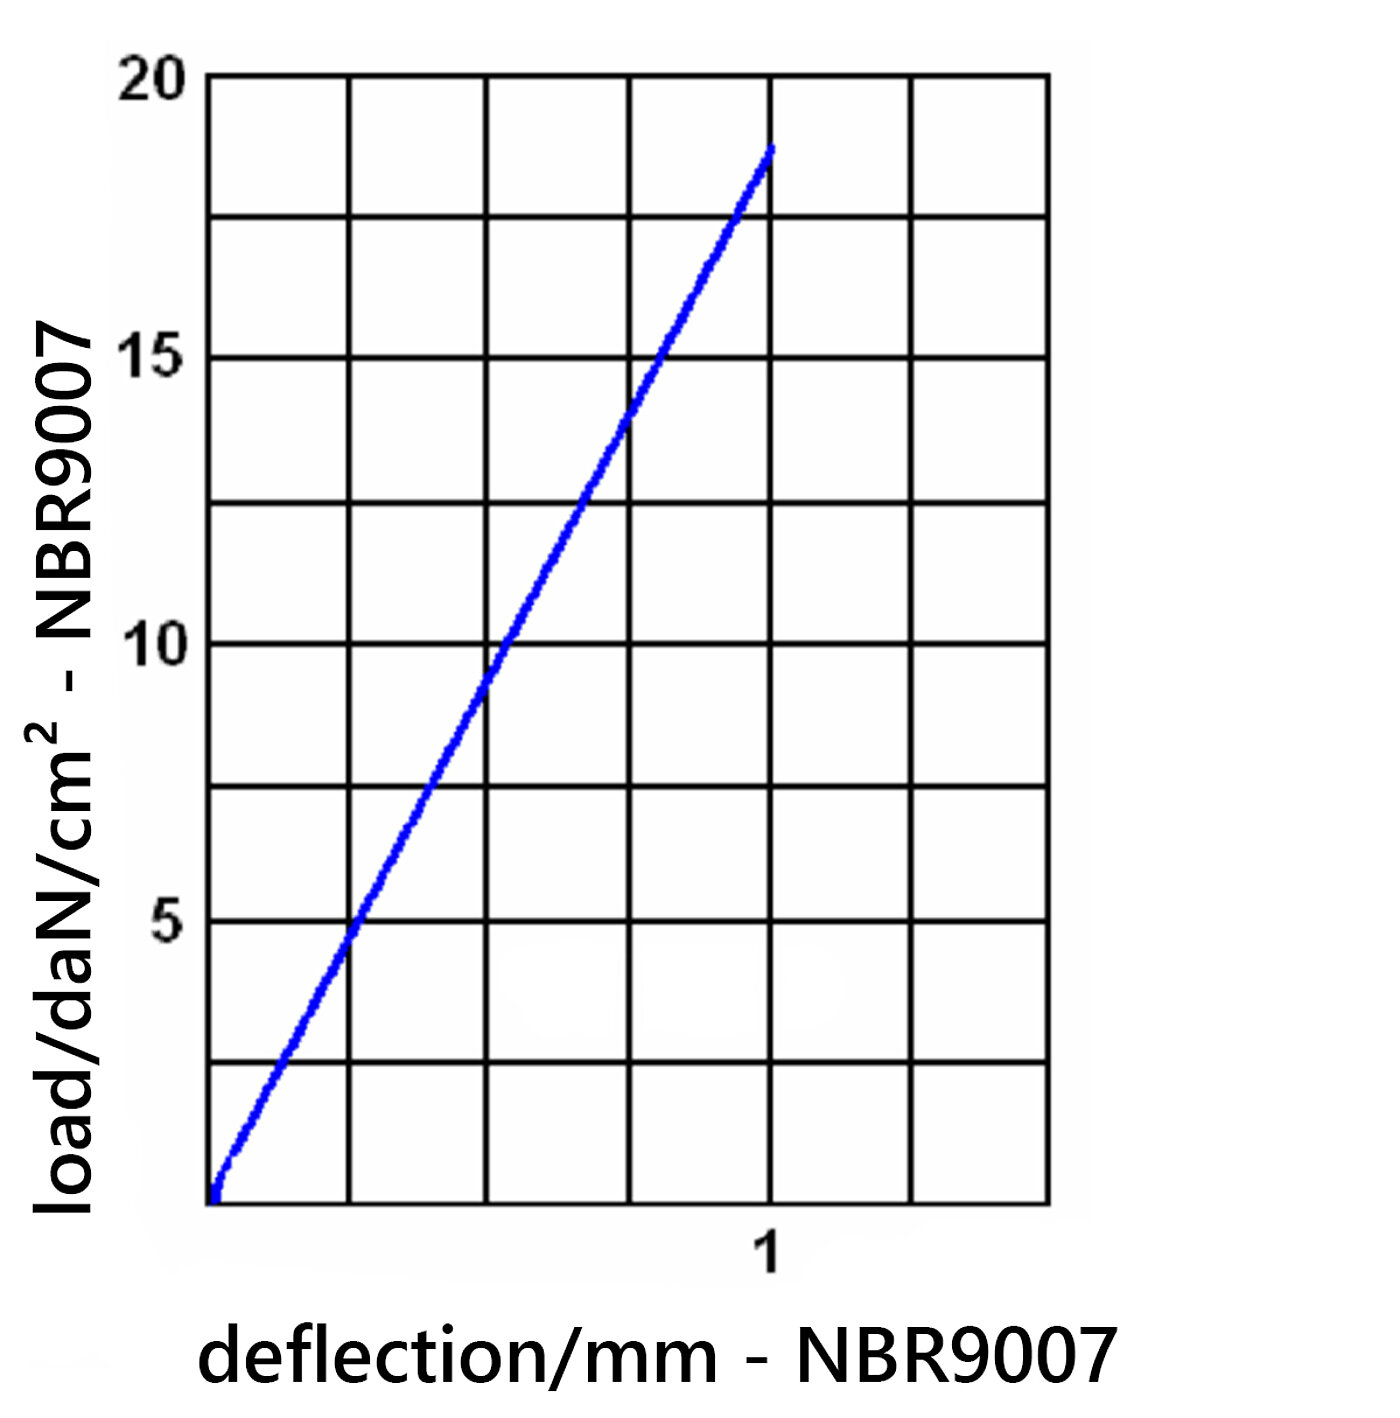 diagramme of the deflection of the elastomer board NBR9007 under load 